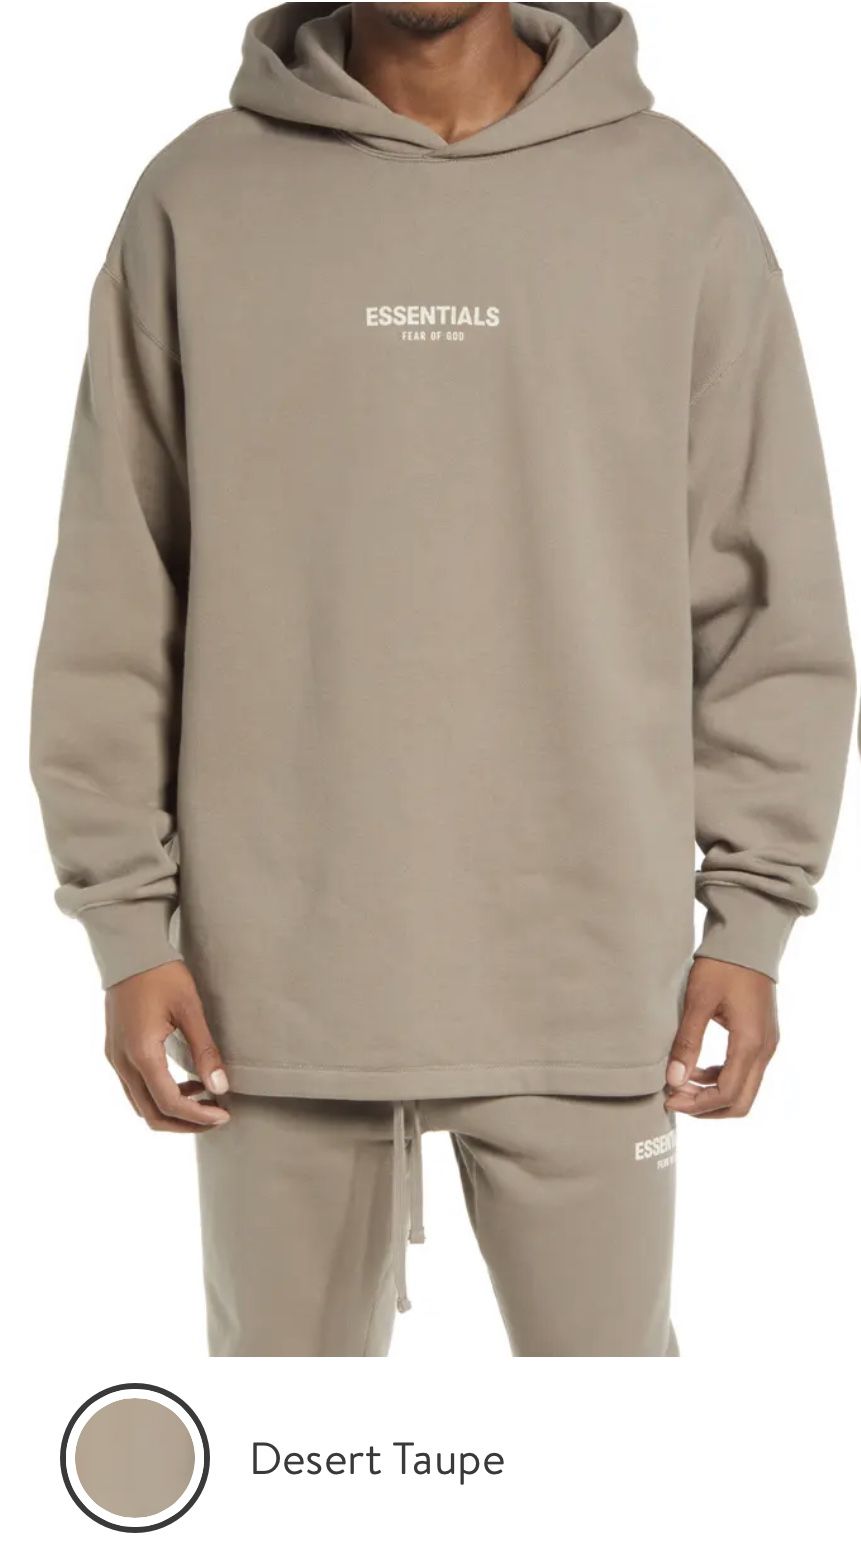 Fear of God “Essentials” pull over hoodies. (Desert Taupe) colorway. Now available! Sizes: (MED/LRG/XXL). In Mens. $145. Each cash. 